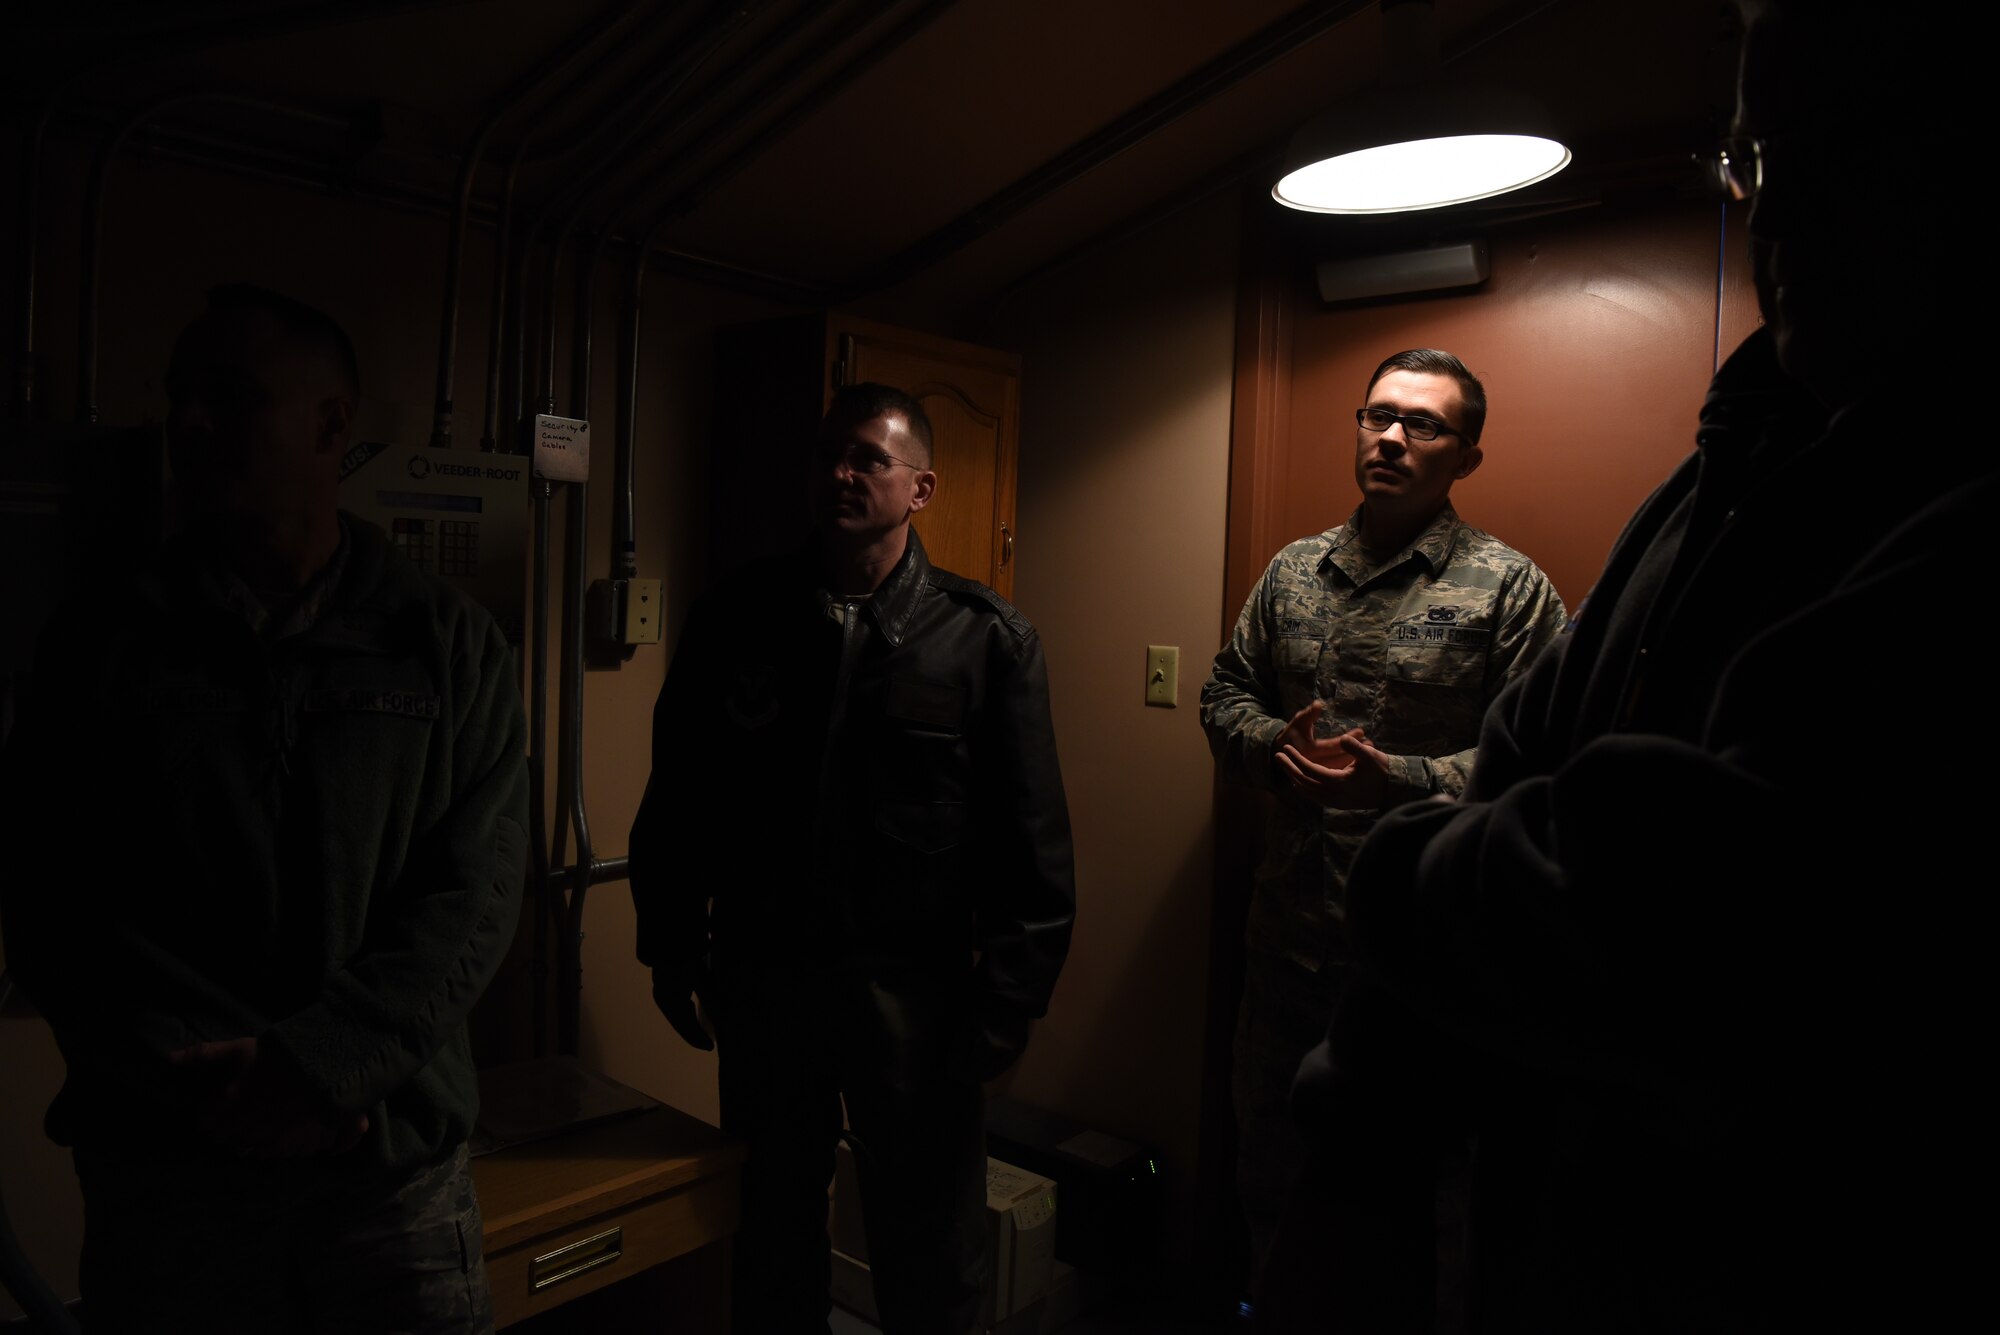 Tech. Sgt. Corey Crim, facility manager, gives 90th Logistic Readiness Squadron Airmen an inside look at his job and the facility he is responsible for maintaining during a tour of a Missile Alert Facility in F.E. Warren Missile Complex, Nov. 8, 2018. The 319th Missile Squadron hosted a group of LRS Airmen to  provide cross-talk between career fields and increase 90th LRS mission role awareness within the ICBM field.. (U.S. Air Force photo by Airman 1st Class Abbigayle Wagner)